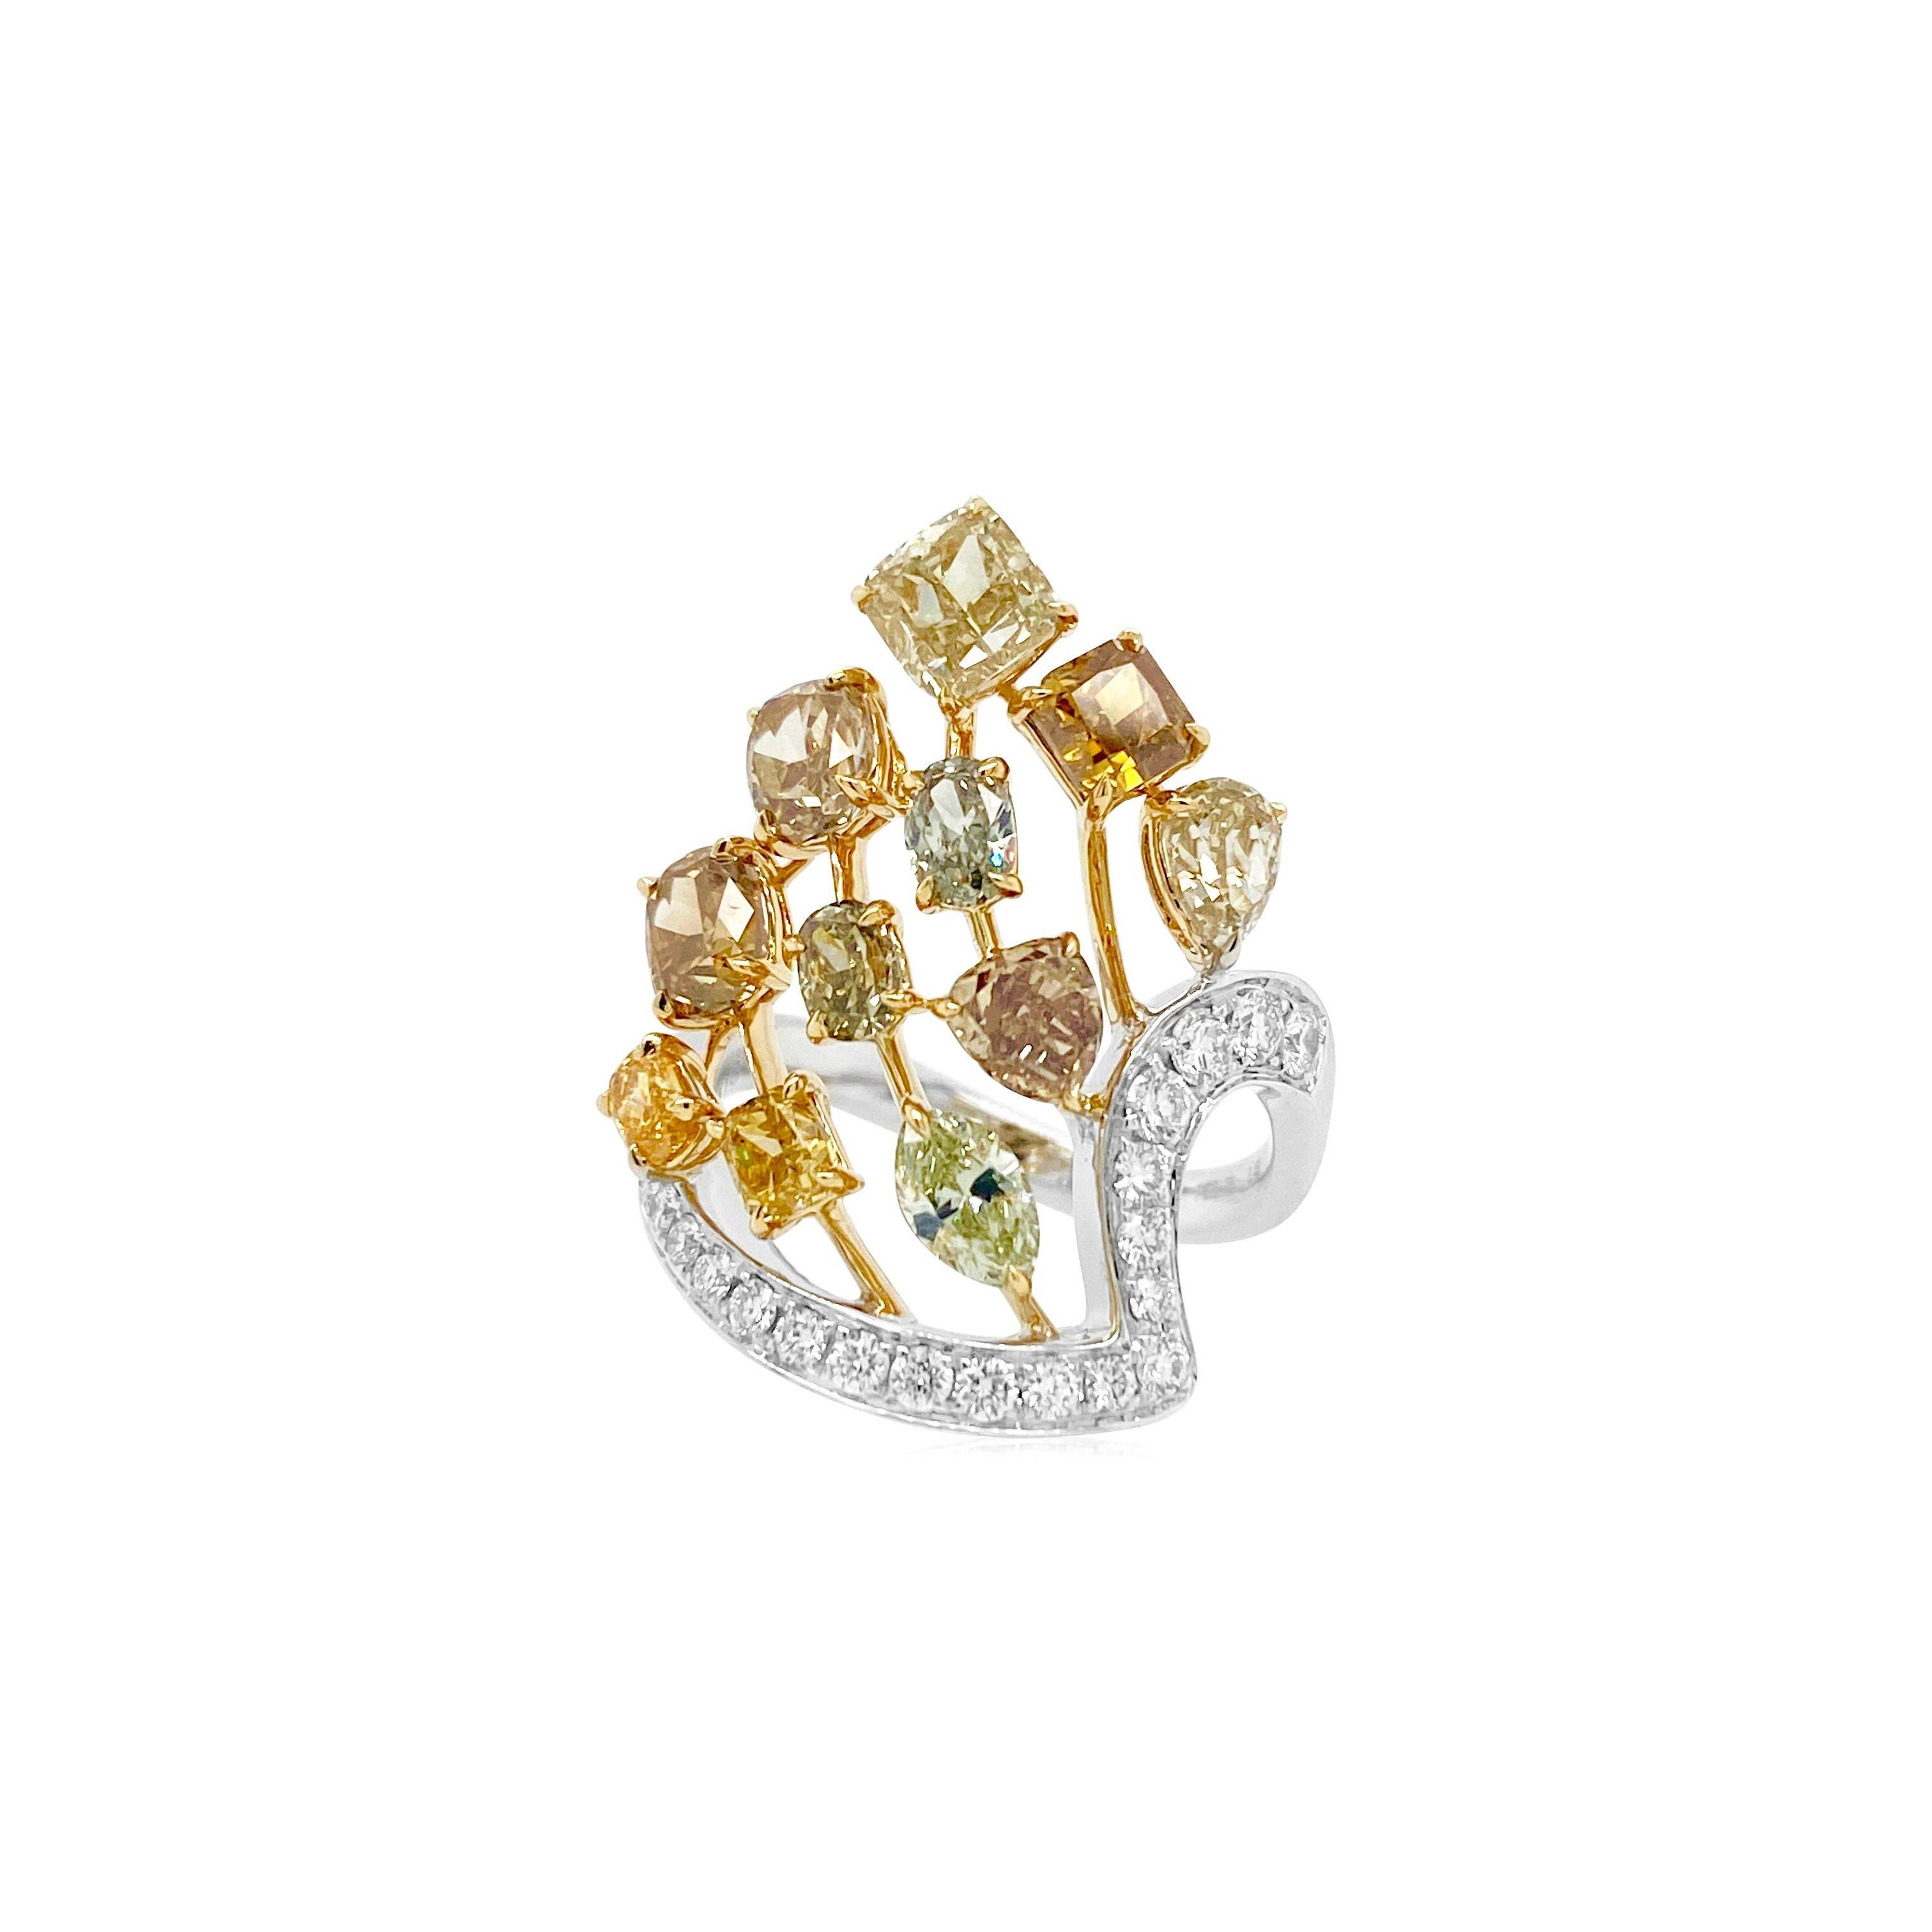 This ring has an opulent look with a Rare selection of Natural color diamonds including yellow, brown and greenish hues. Diamonds of different shapes and colors are brought together in a stylish design creating a unique piece perfect for a special